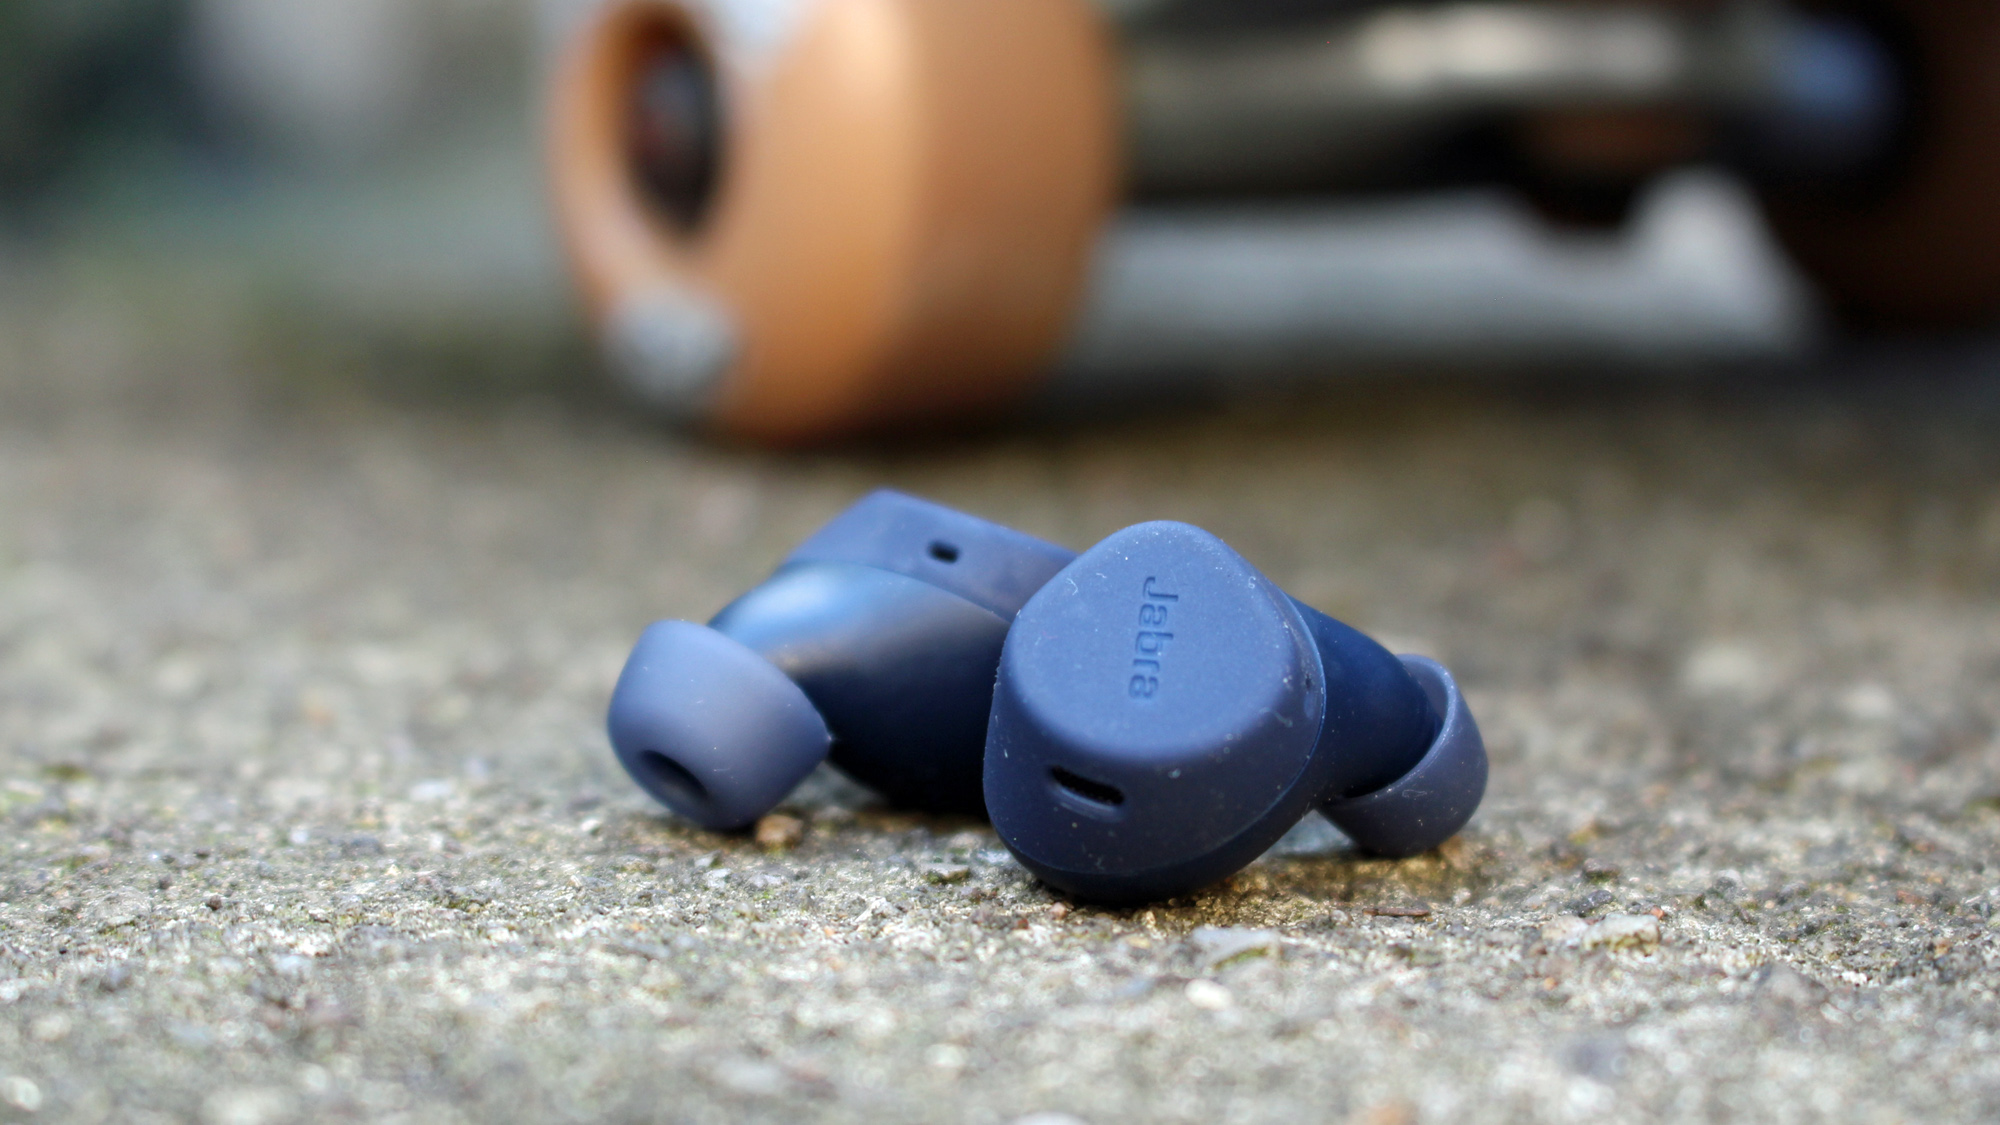 Jabra Elite 8 Active vs. Beats Fit Pro: Which workout earbuds are